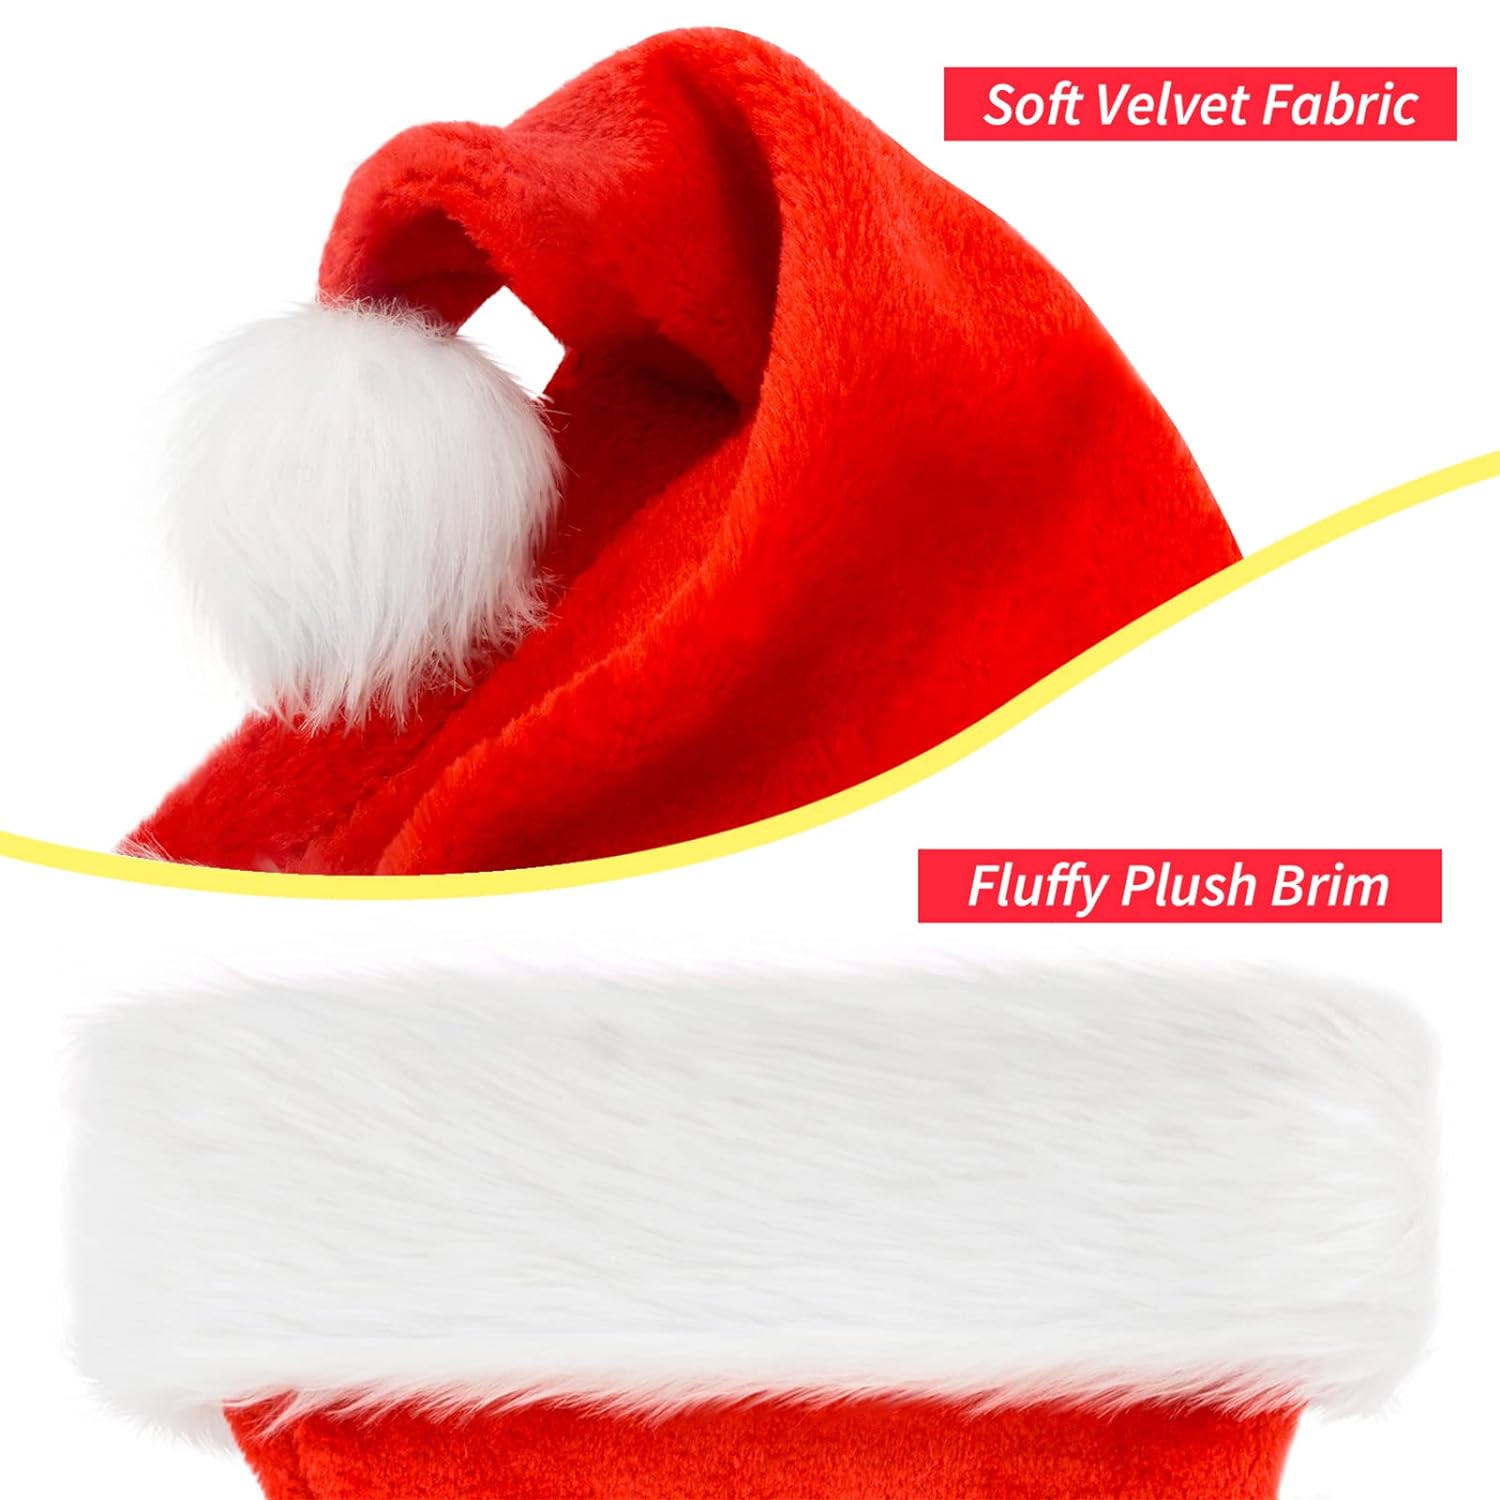 eCraftIndia Red and White Velvet Classic Fur Merry Christmas Hats, Santa Claus Caps for kids and Adults - XMAS Caps, Santa Hats for Christmas, New Year, Festive Holiday Party Celebration (Set of 9) 6